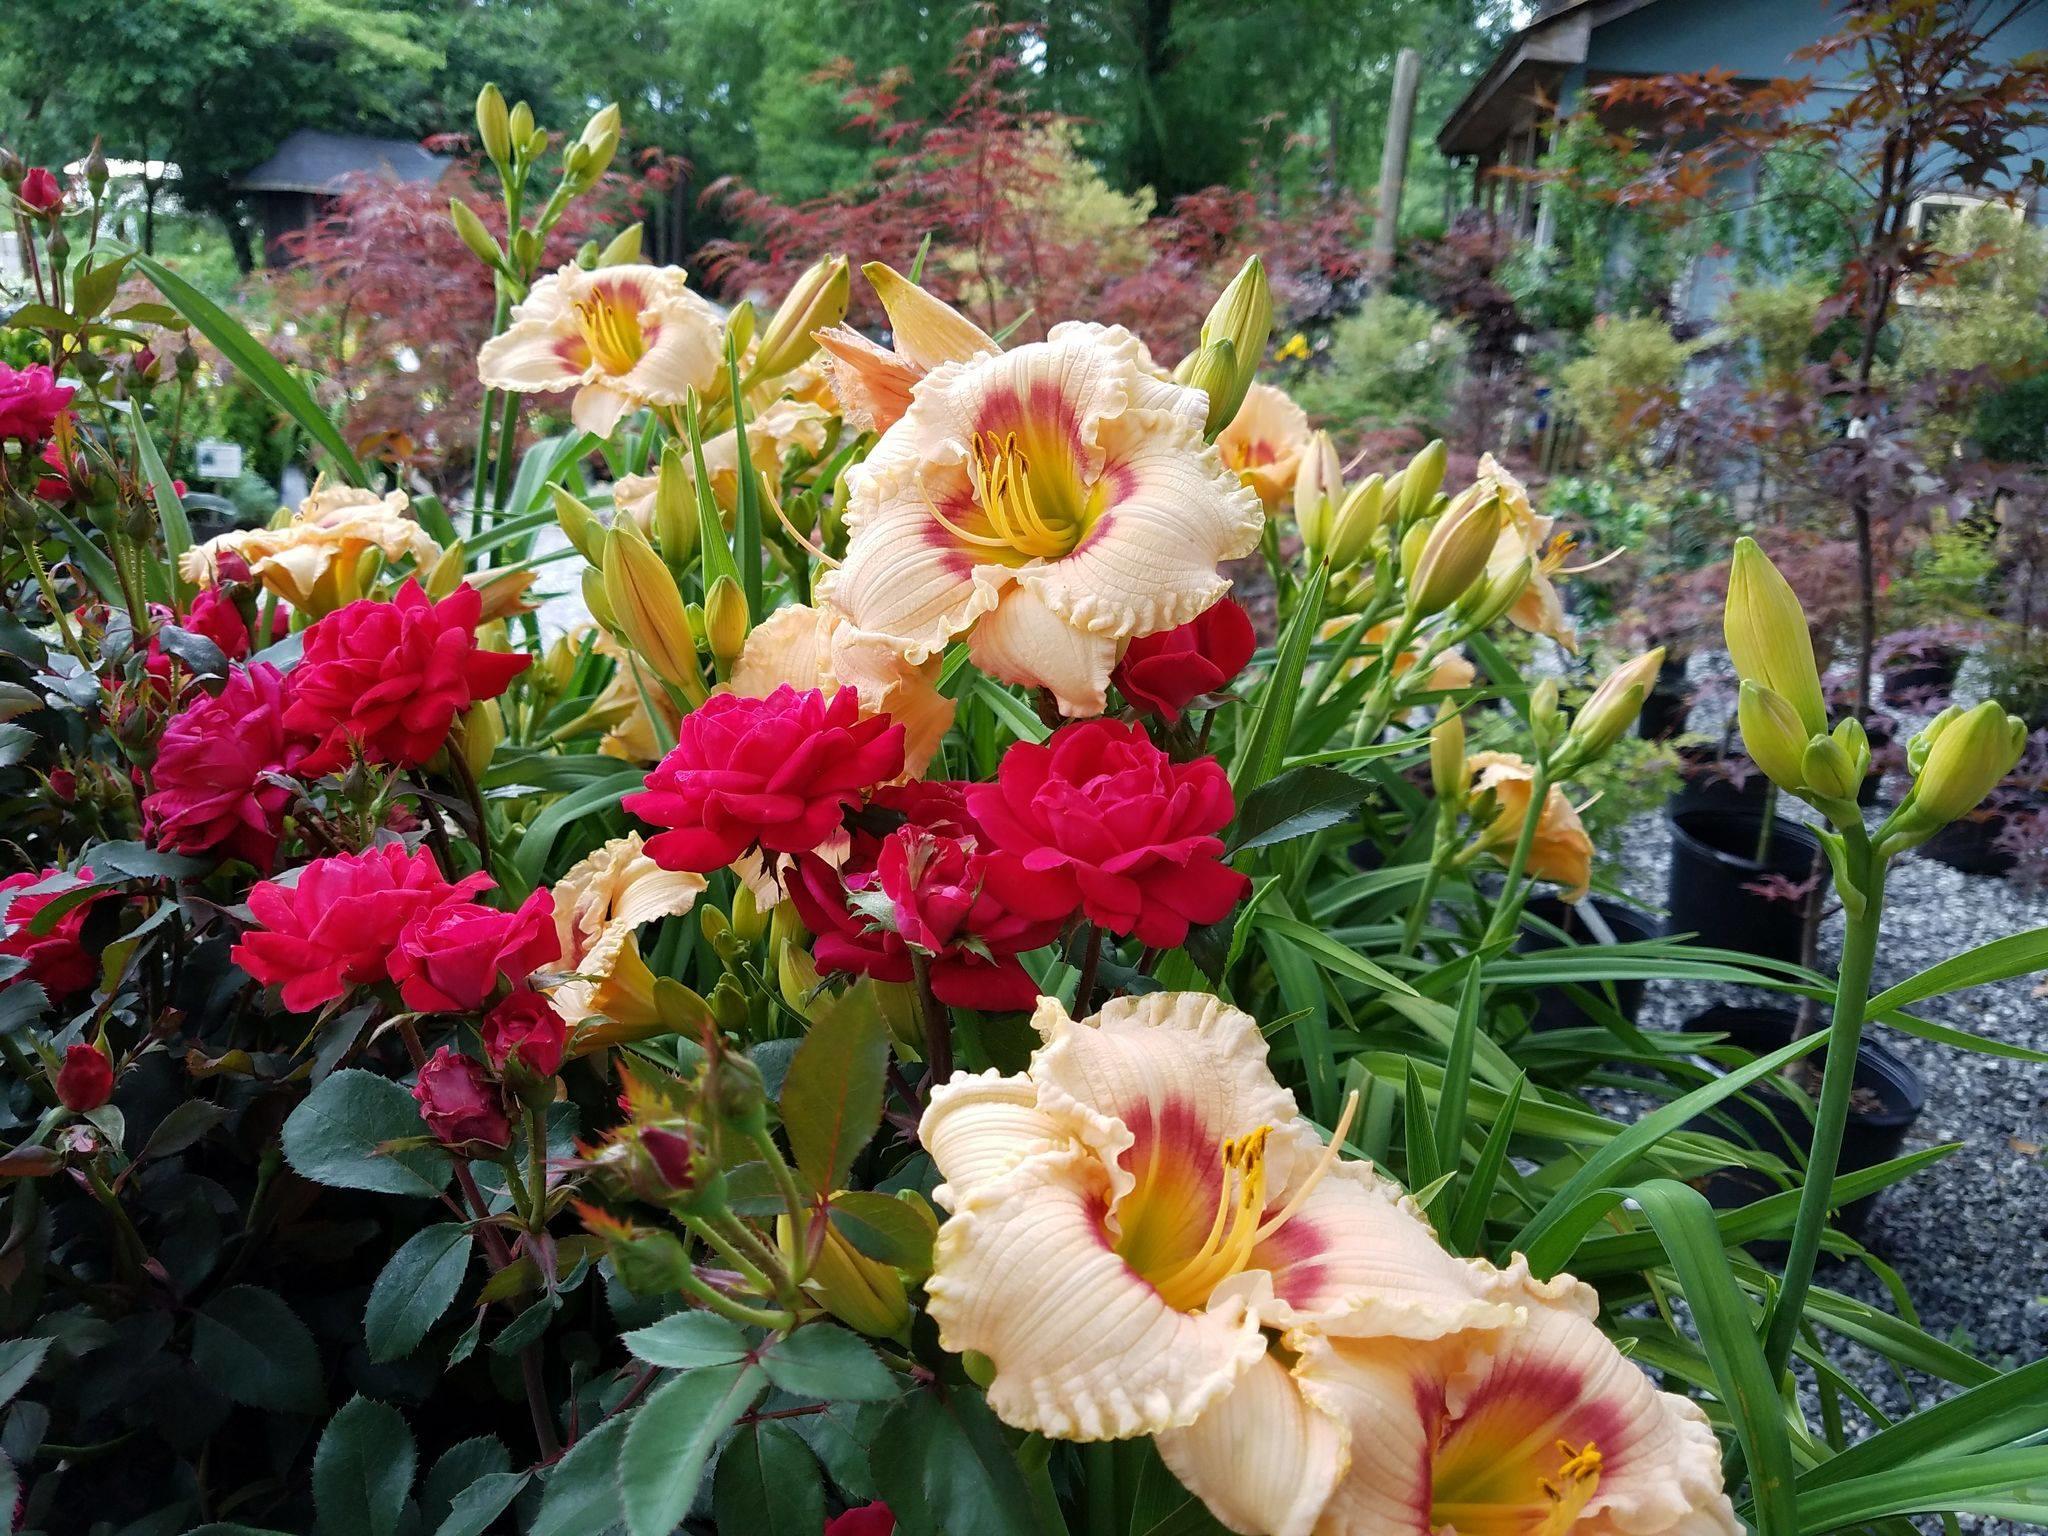 Double Red Knock Out Roses with our Radient Ruffles Daylilies. Such a beautiful combination and one of many flowering plants for sale here at Settlemyre Nursery.